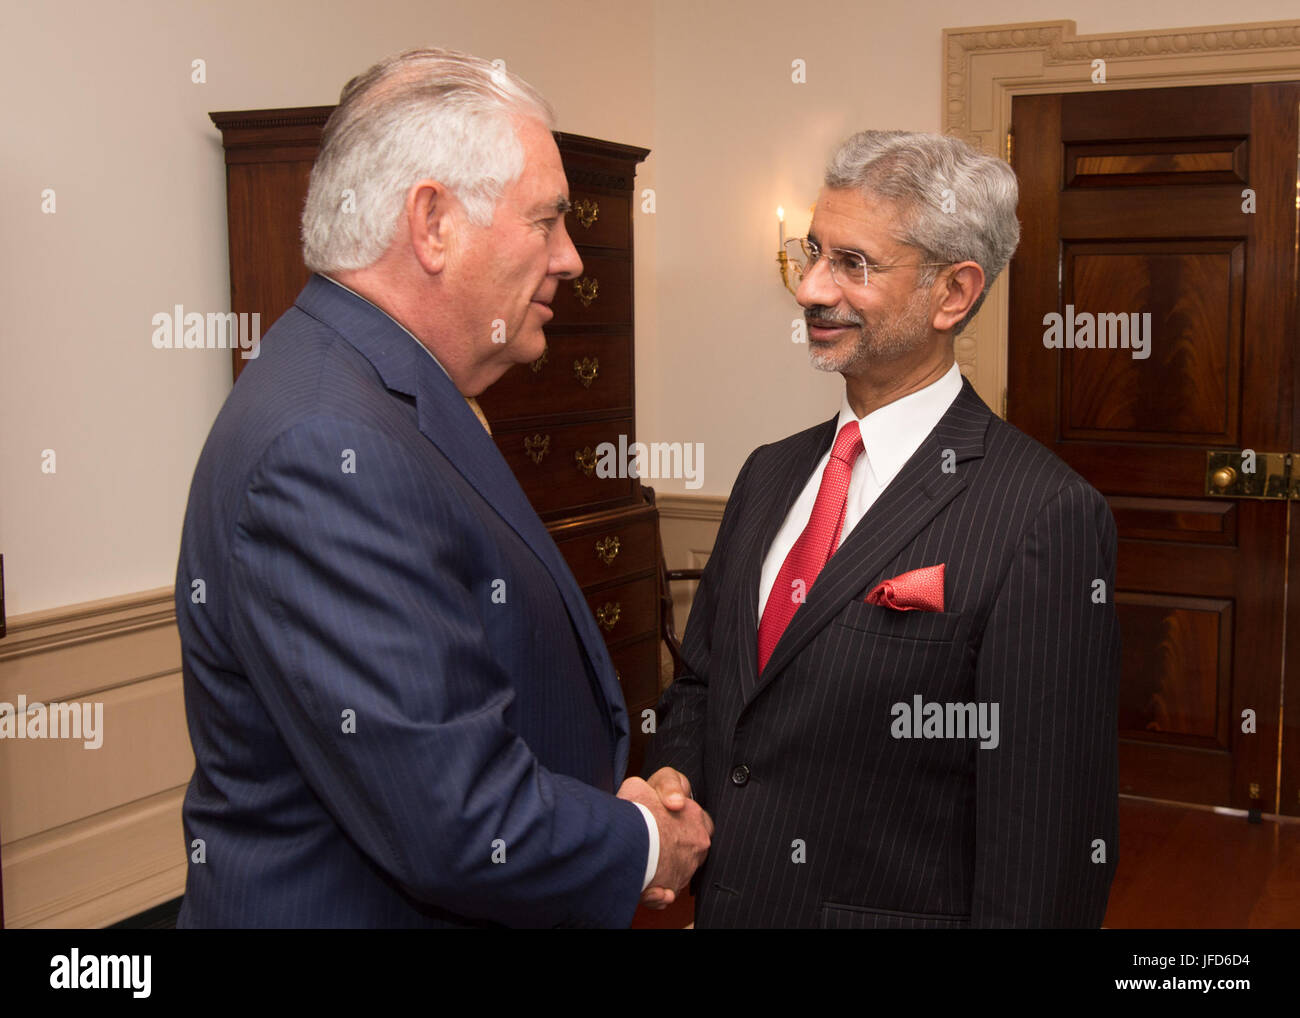 U.S. Secretary of State Rex Tillerson greets Indian Foreign Secretary Subrahmanyam Jaishankar before their bilateral meeting at the U.S. Department of State in Washington, D.C., on June 23, 2017. Stock Photo